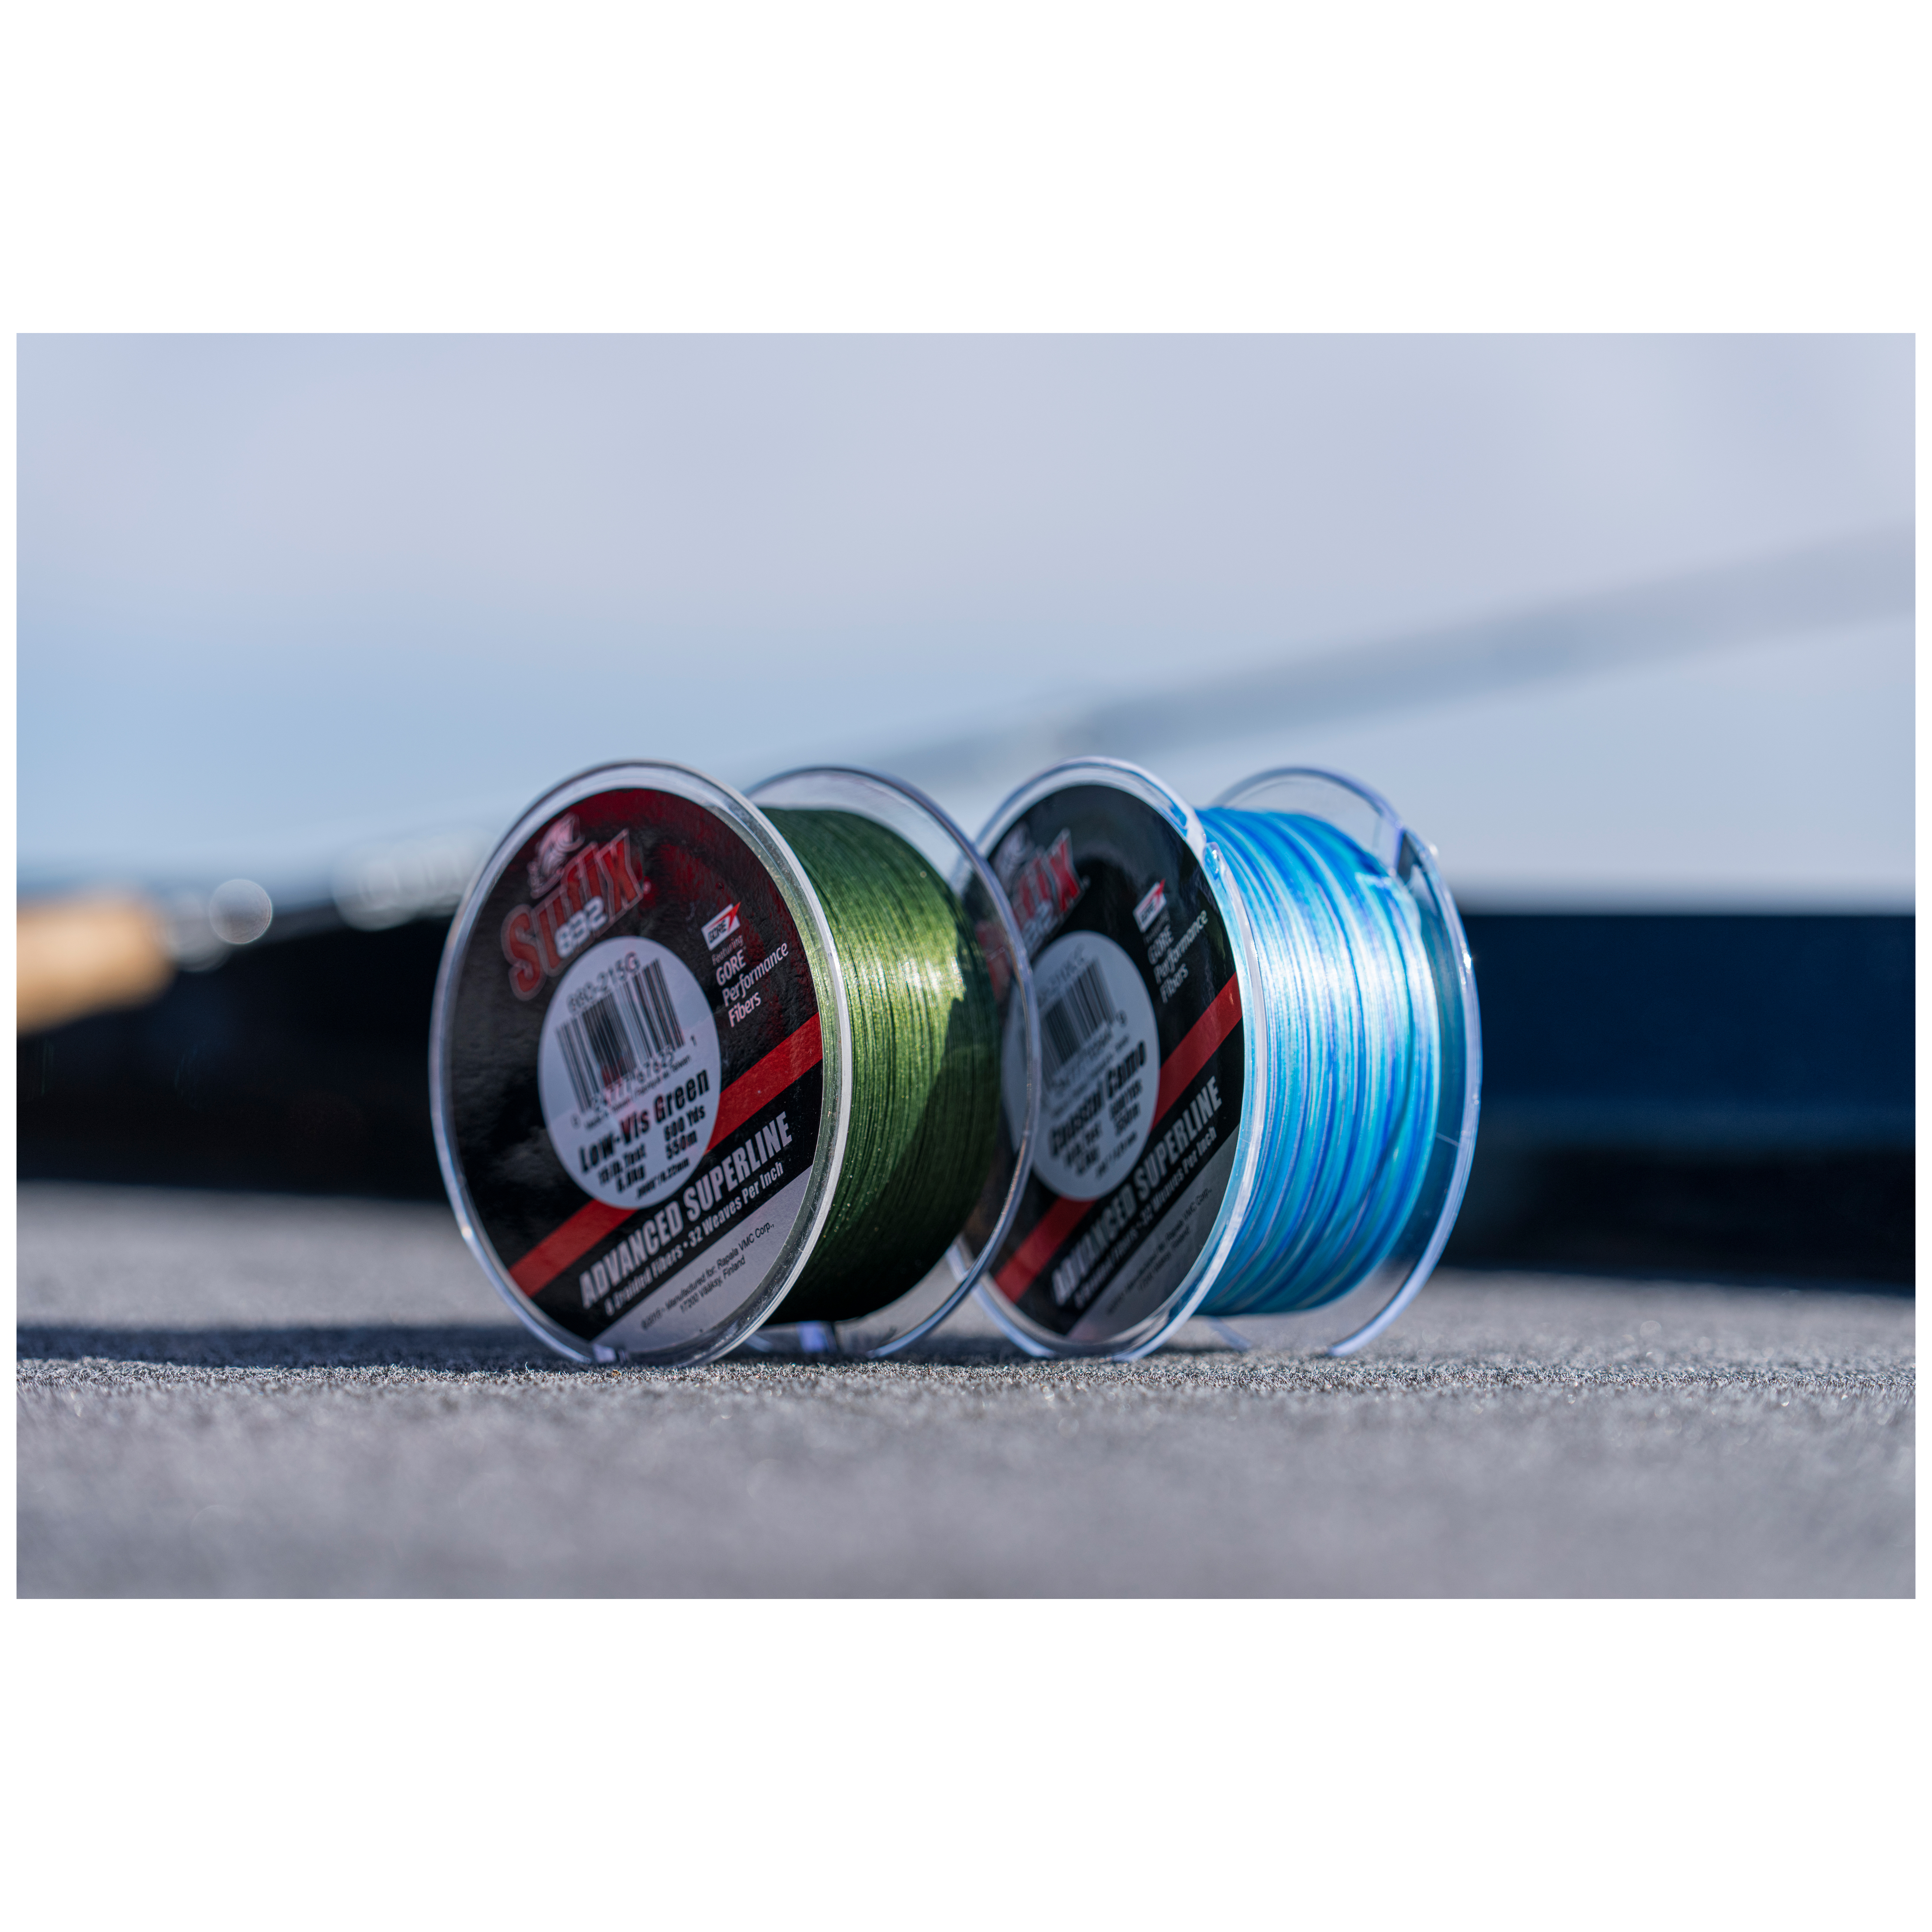  Fins Spectra 150-Yards Windtamer Fishing Line, Slate Green,  4-Pound : Superbraid And Braided Fishing Line : Sports & Outdoors